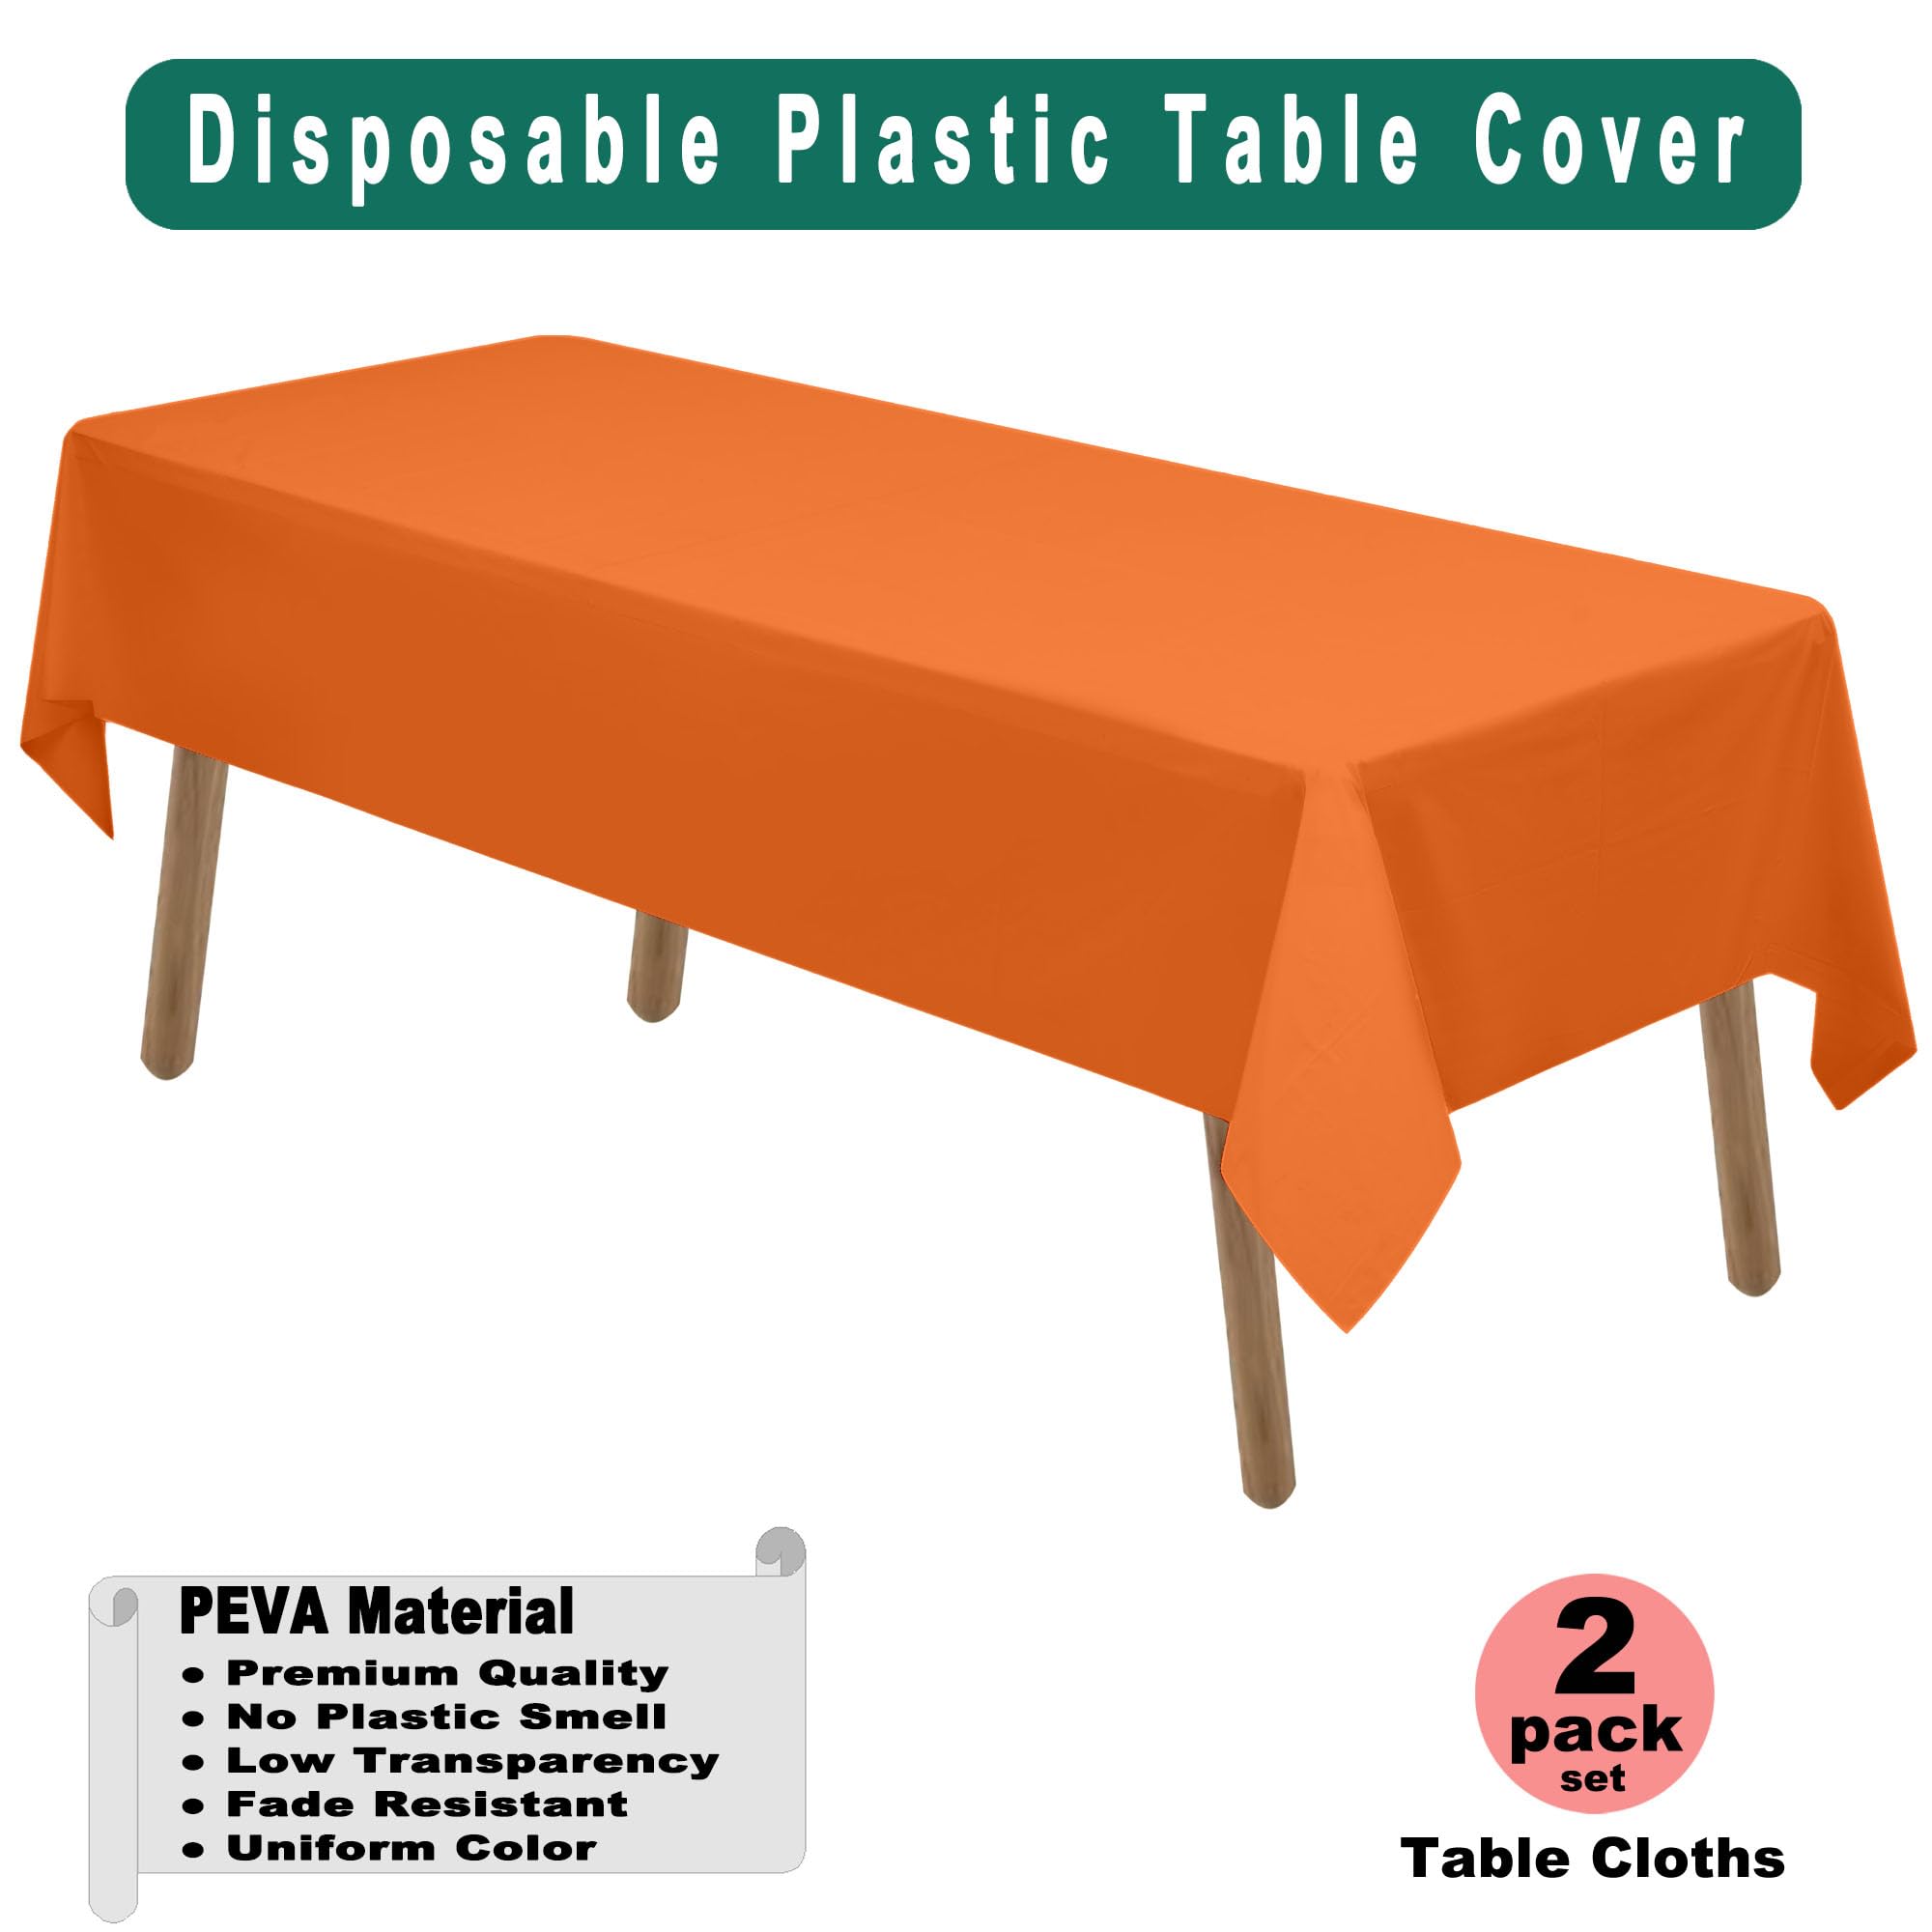 PARTY ULYJA Orange Plastic Tablecloths 2 Pack Disposable Table Covers 54 x 108 Inch PEVA Fall Colors Table Cloths for BBQ Picnic Birthday Wedding Parties 8 ft Rectangle Table Use